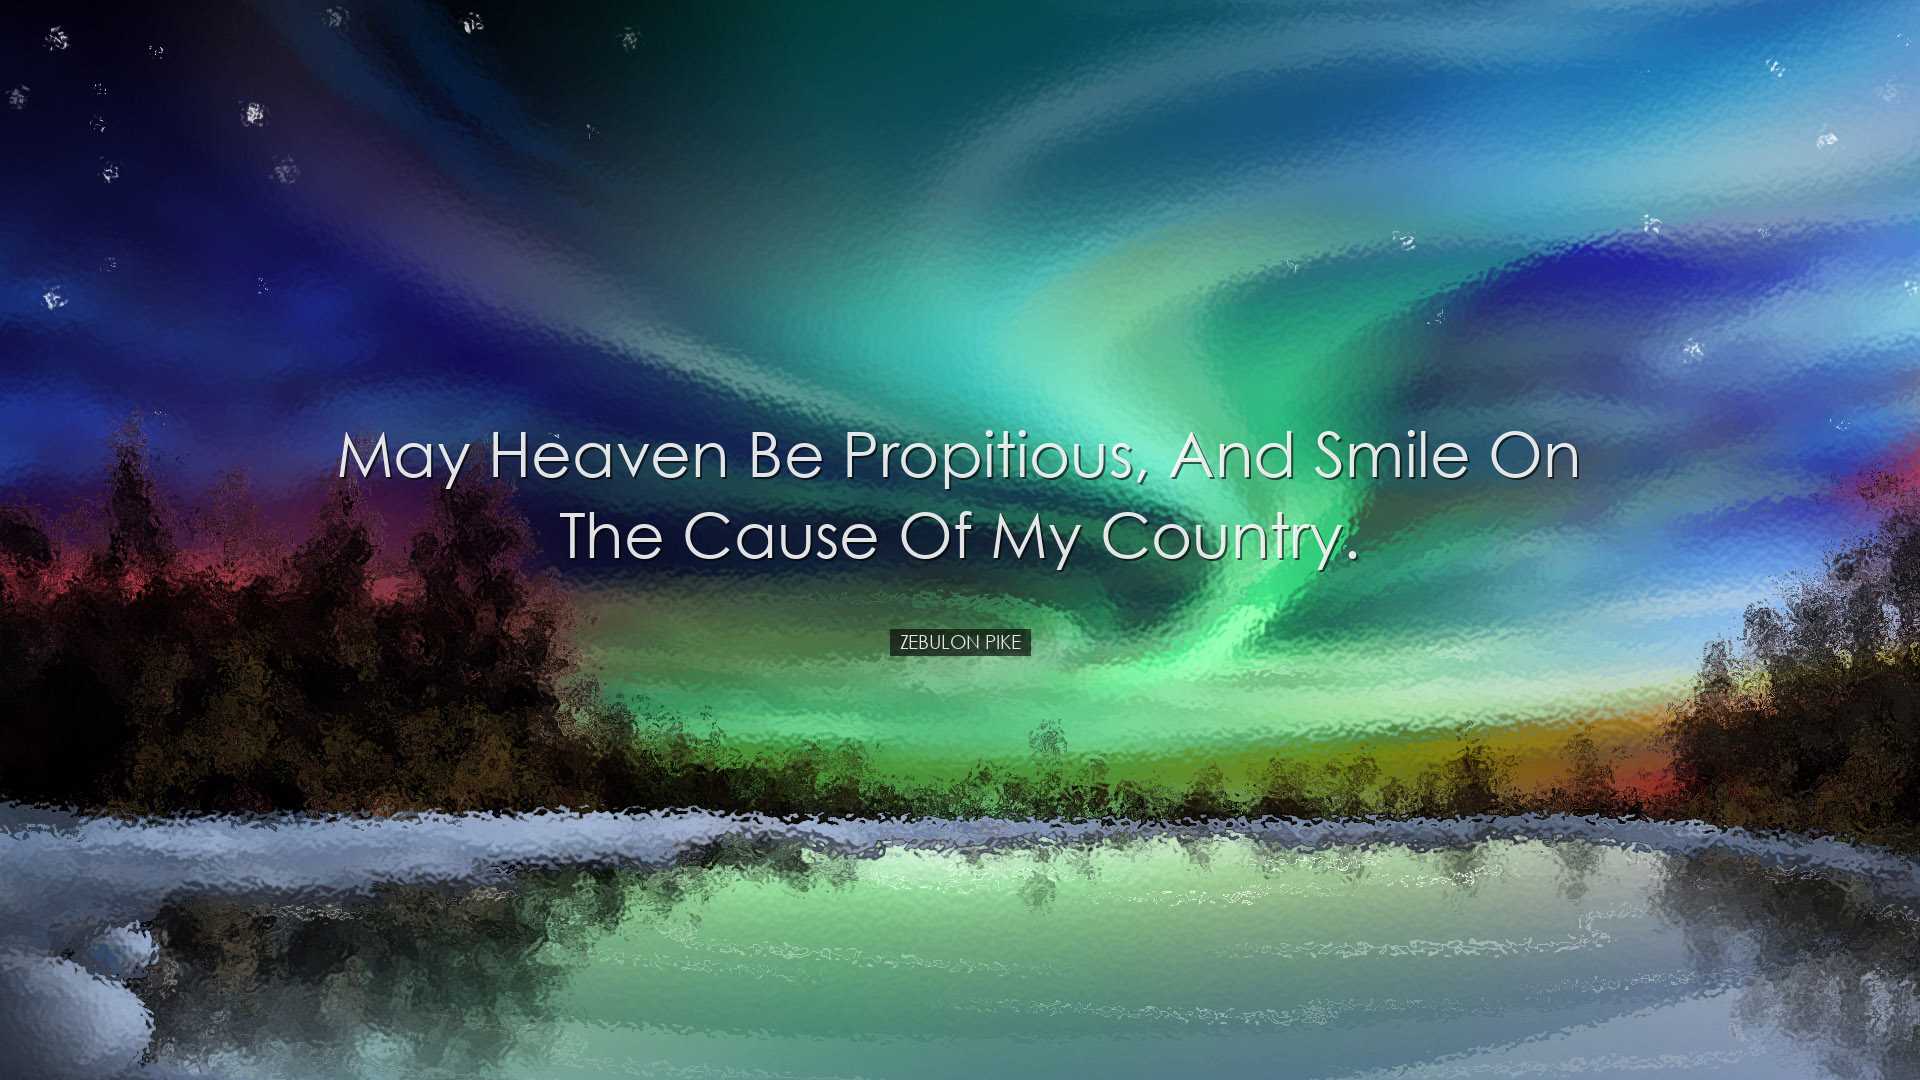 May Heaven be propitious, and smile on the cause of my country. -